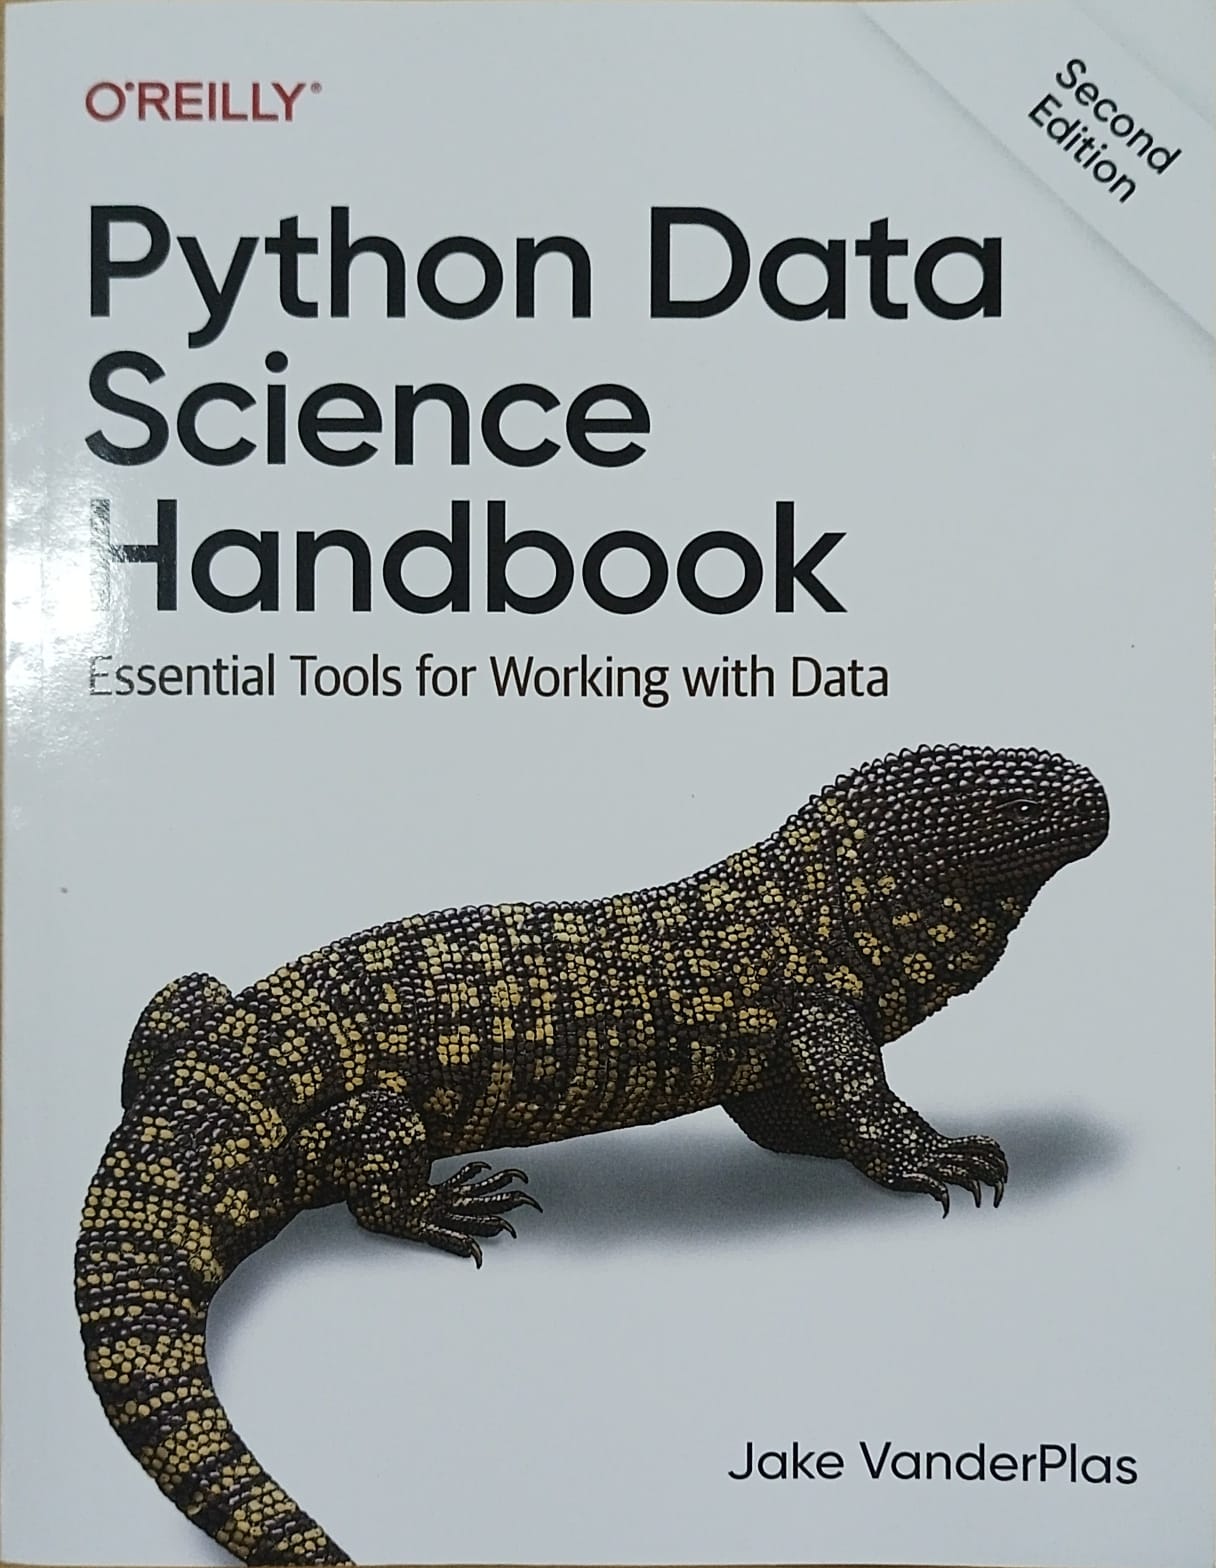 Python data science handbook: essential tools for working with data 2nd edition